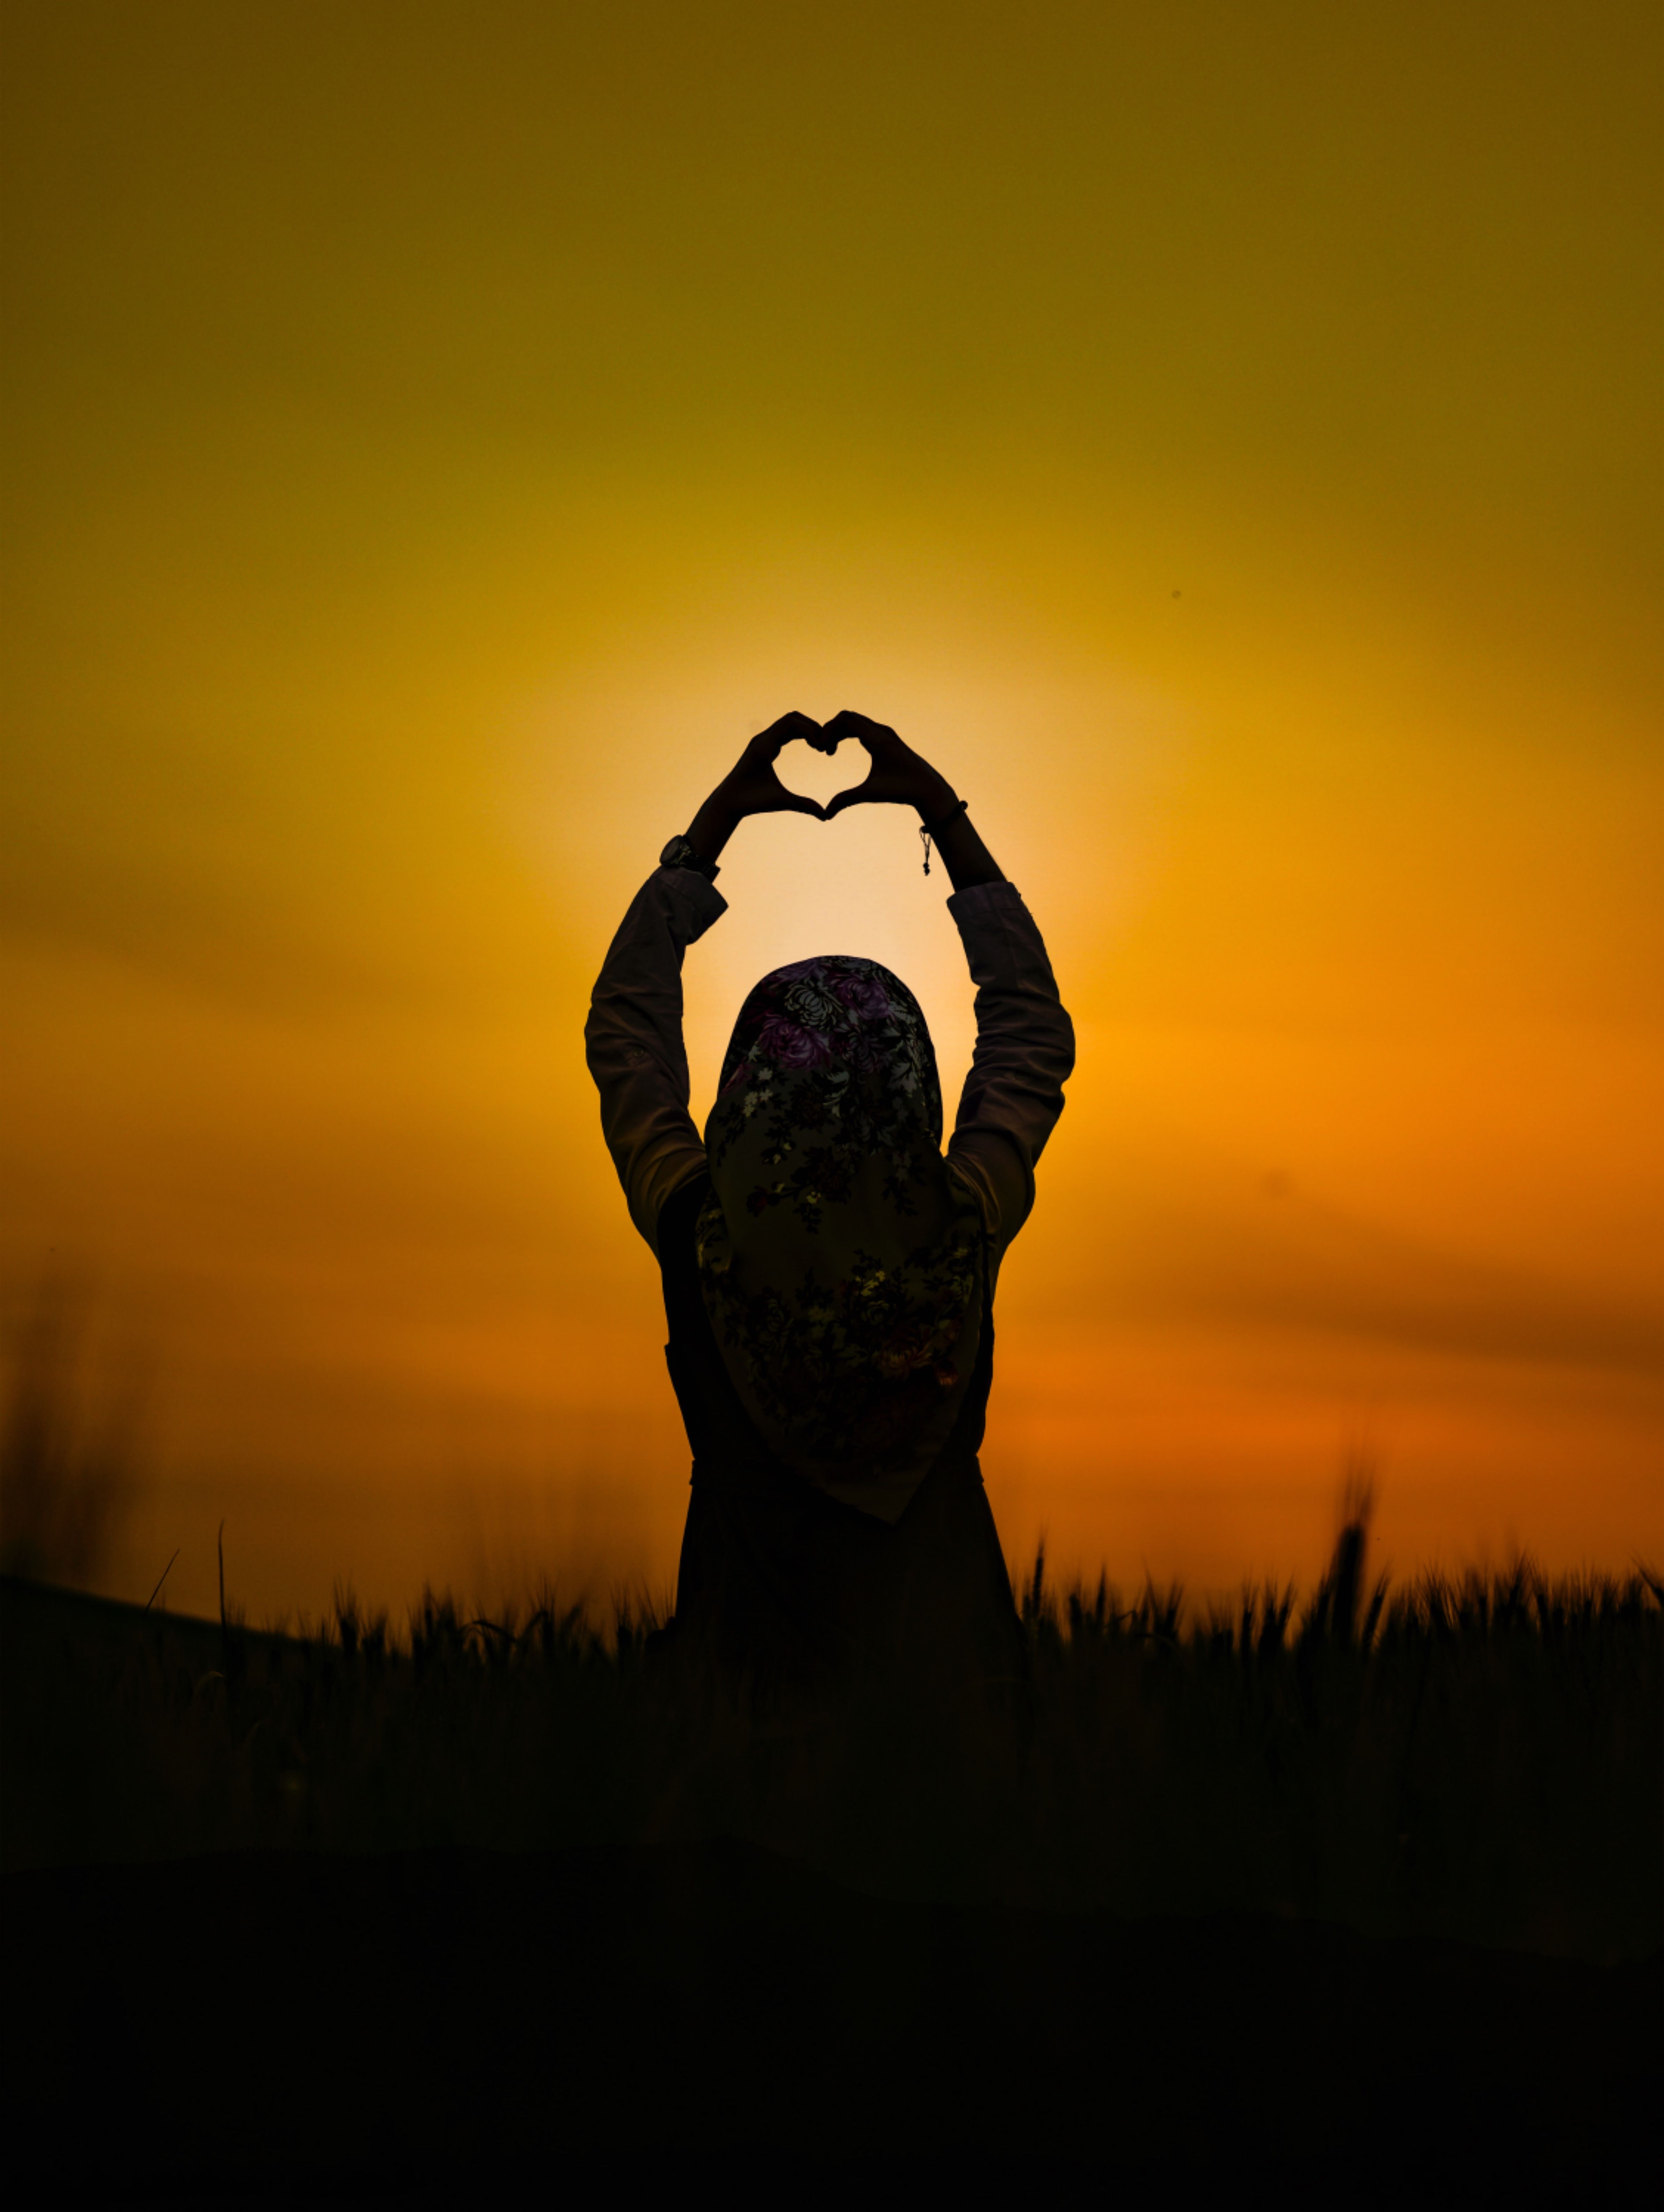 Download wallpaper 4776x6349 silhouette, heart, sunset, girl HD background